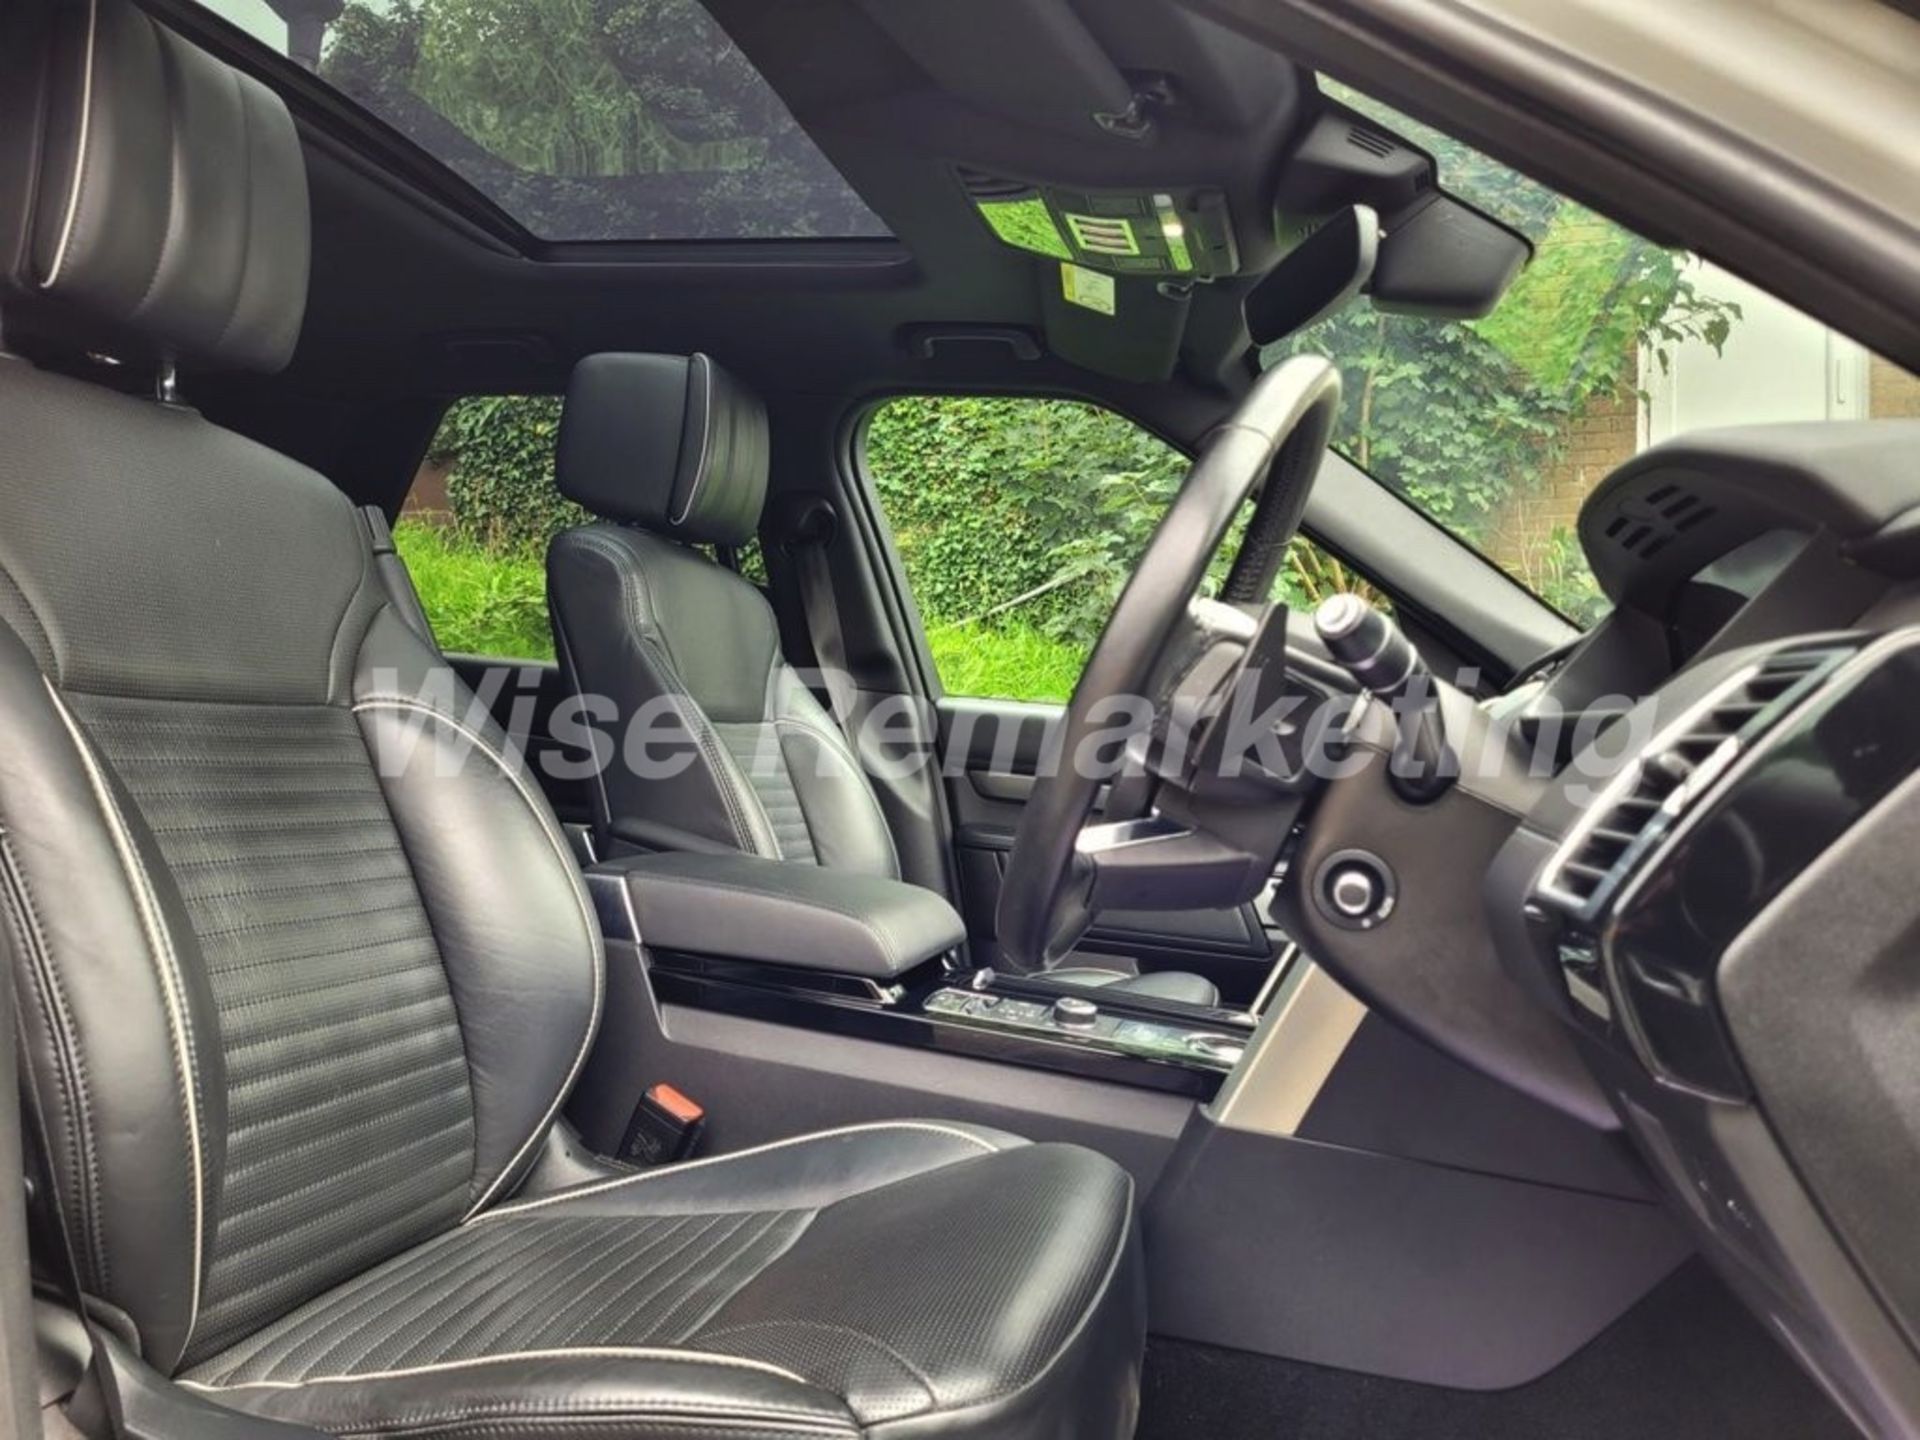 Land Rover Discovery 5 * SUV* (2017 - 67 Reg) *3.0 TD6 - 8 Speed Automatic* (ALL NEW MODEL) - Image 8 of 9